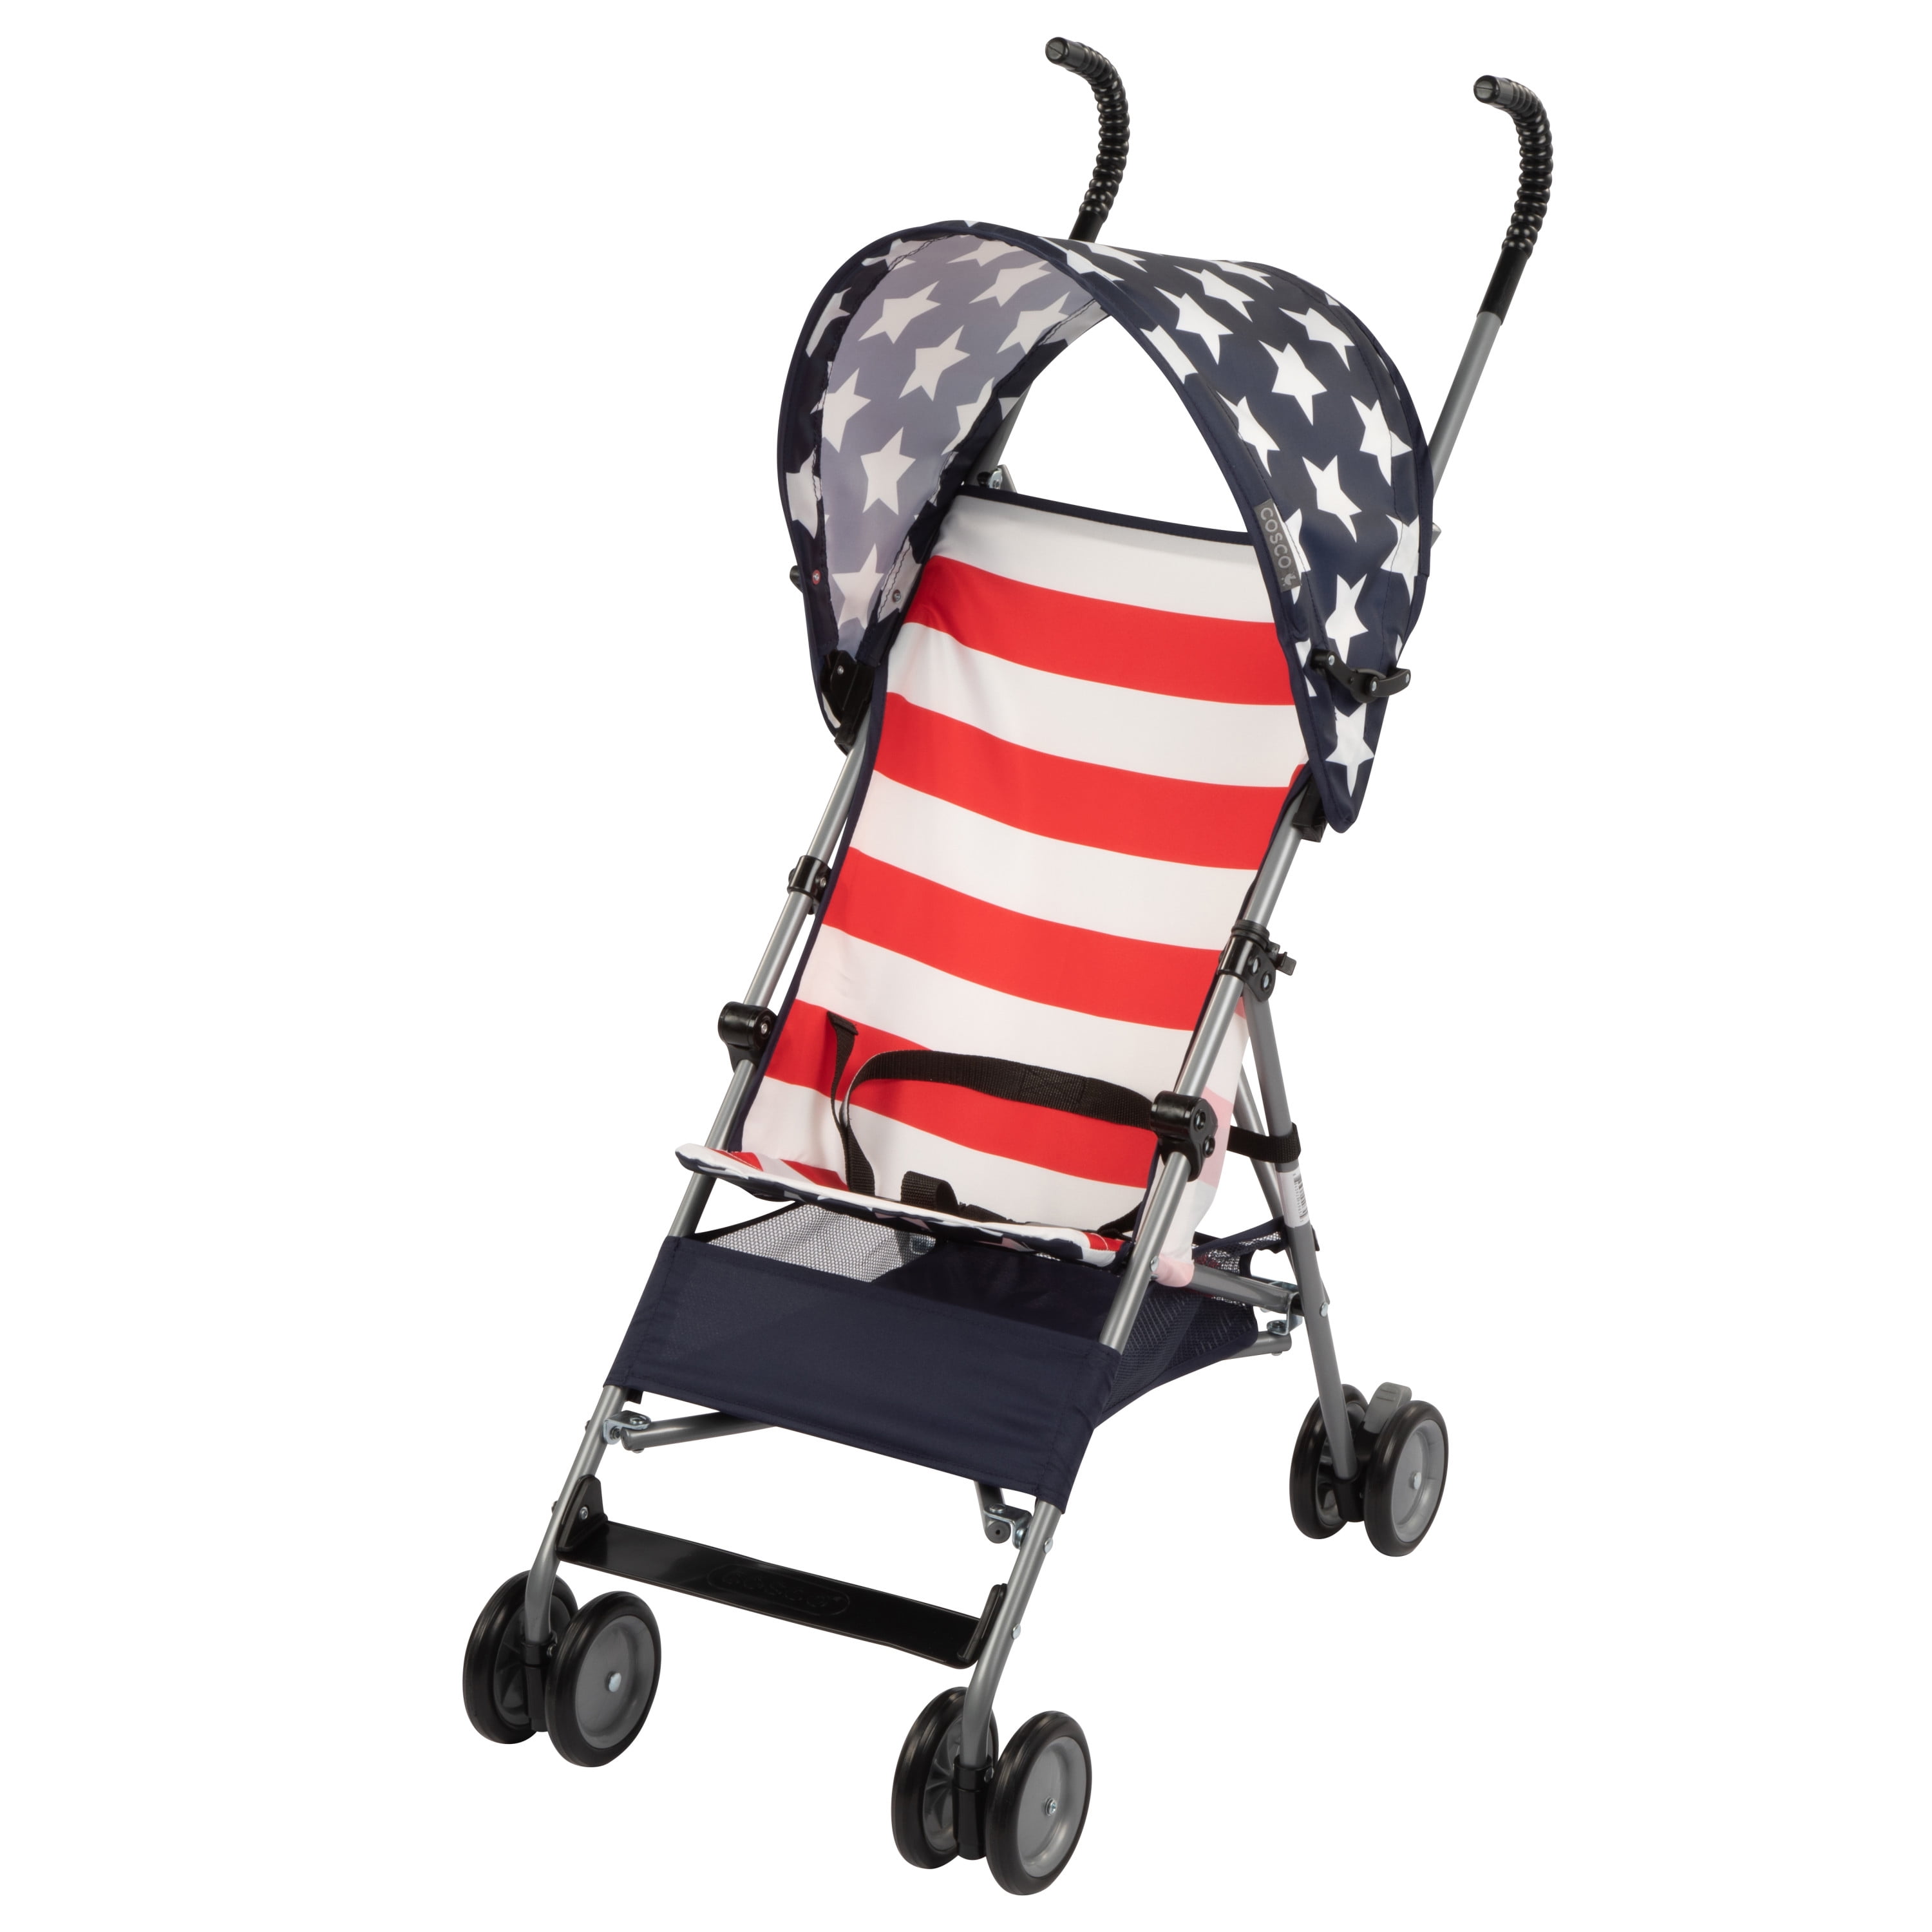 Cosco Juvenile Umbrella Stroller without Canopy American Stars 